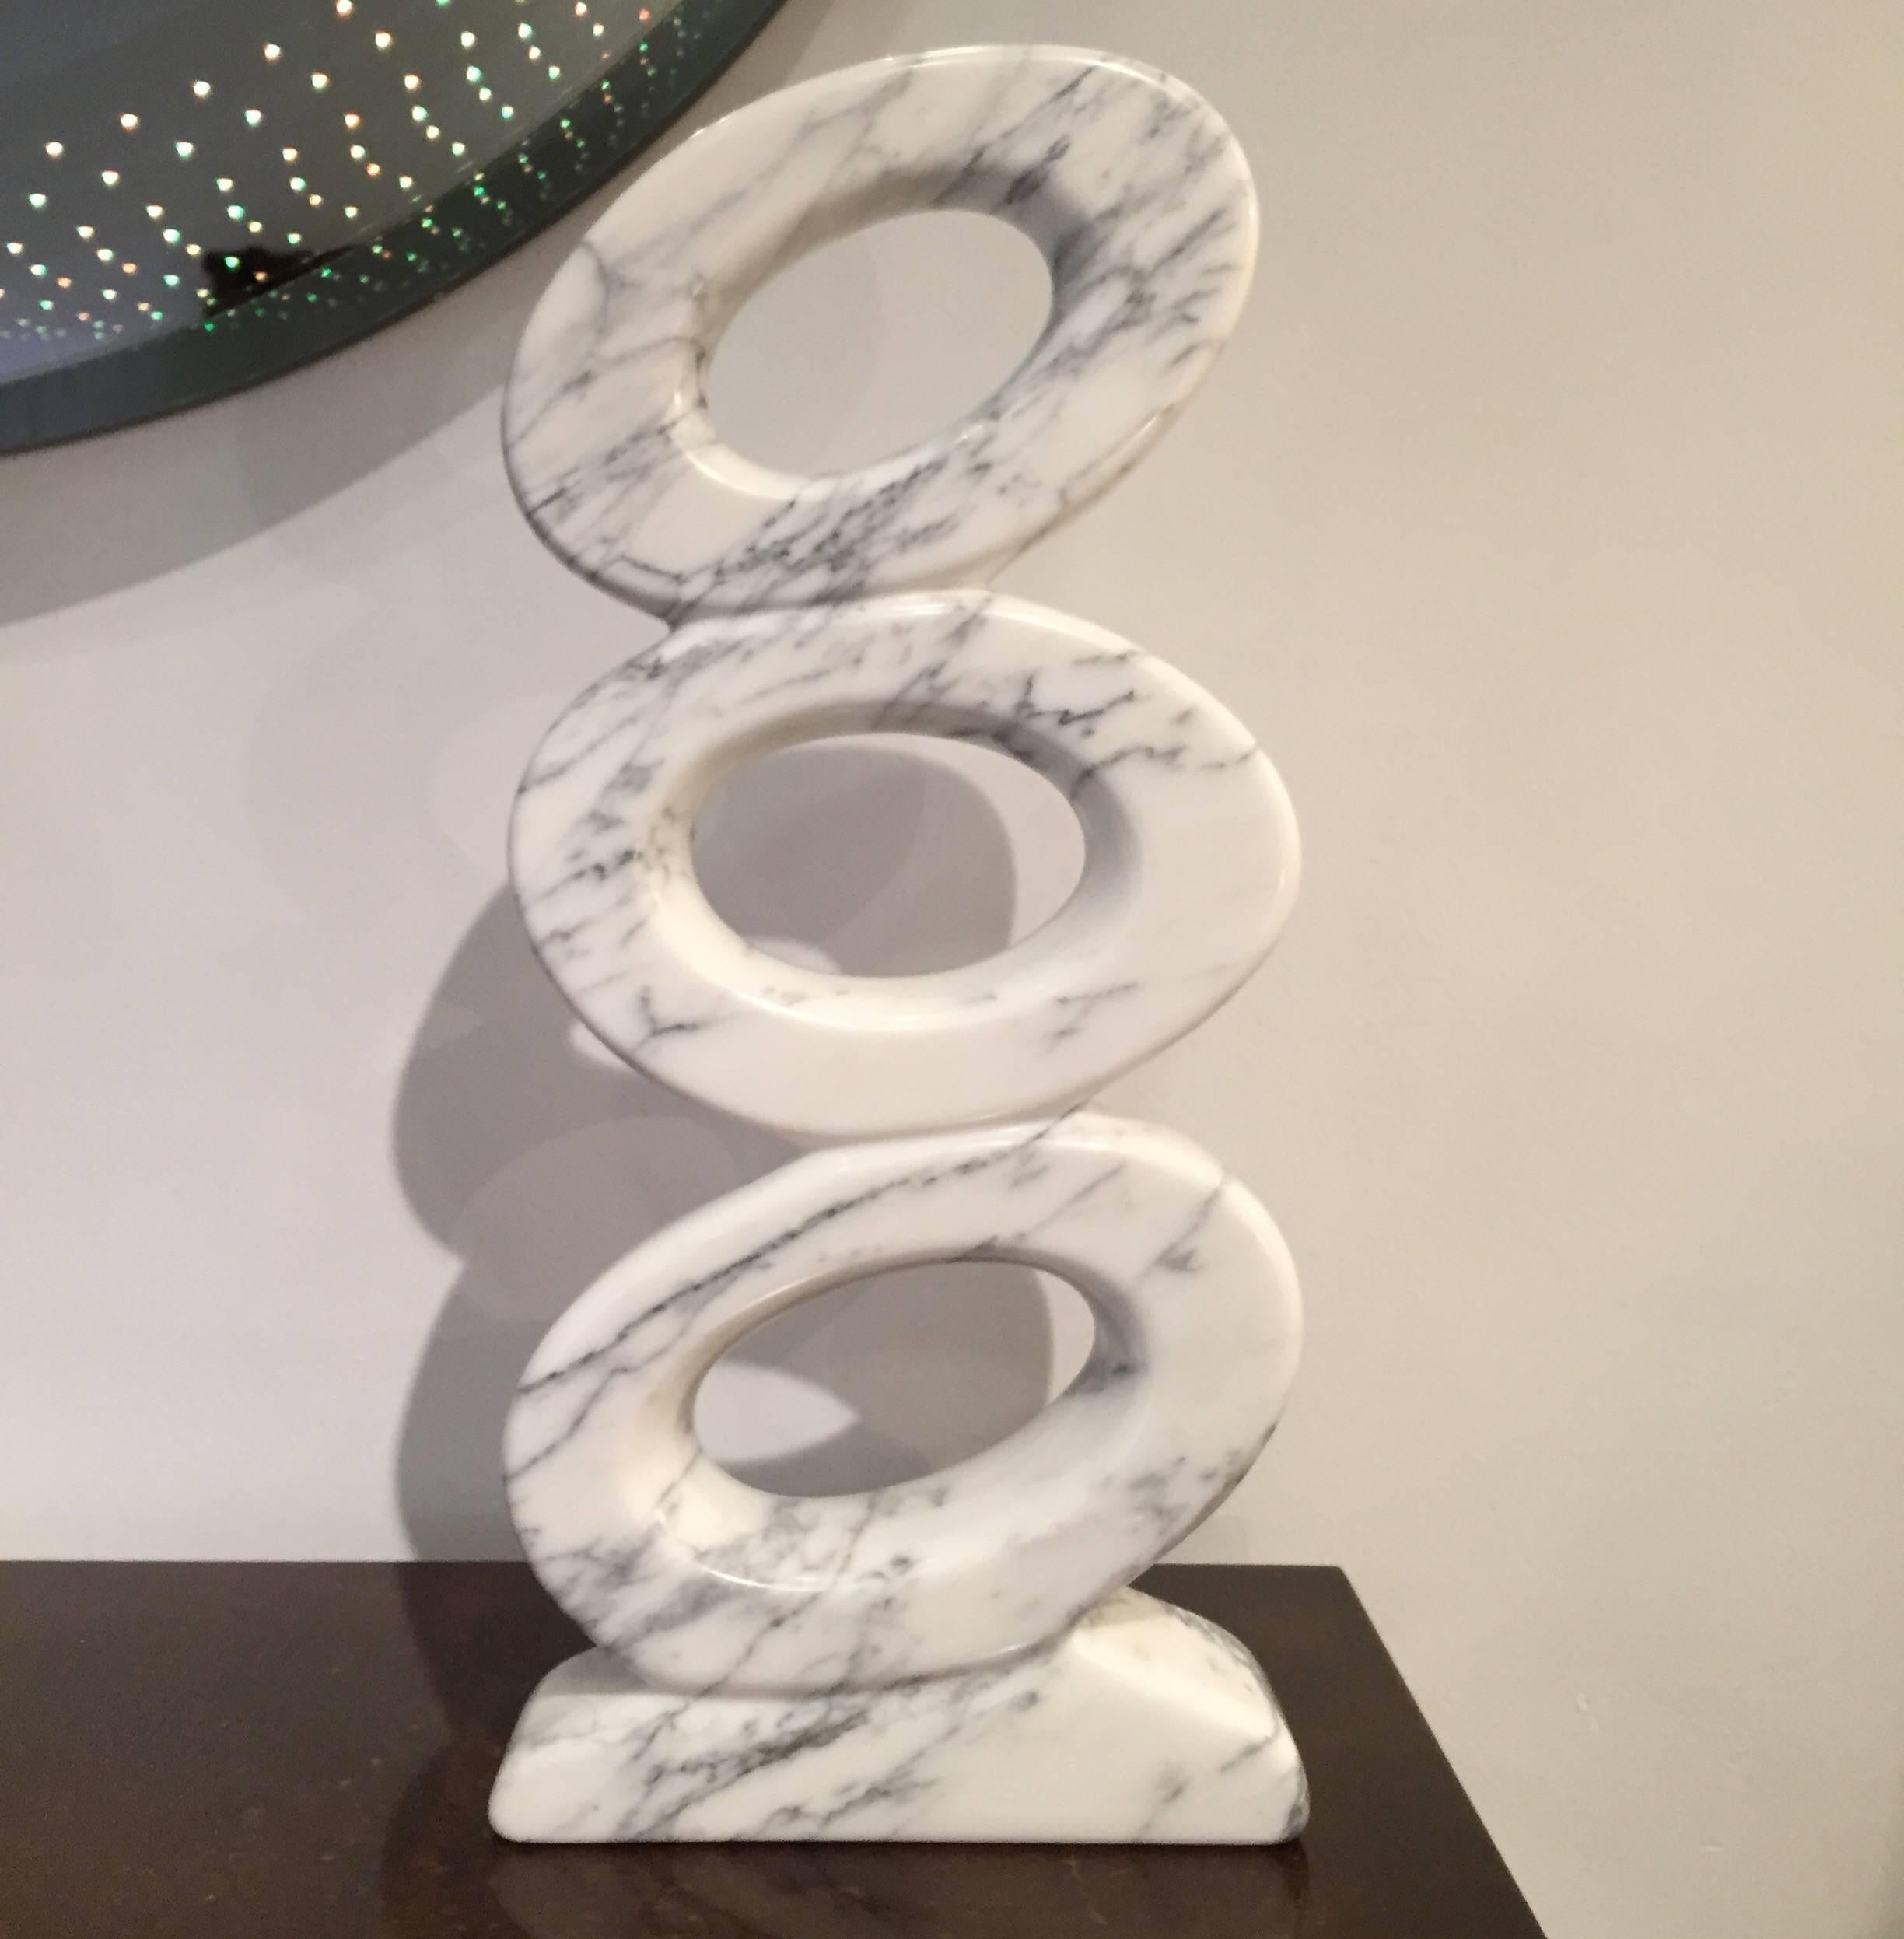 Calacata marble sculpture by handcrafted by the French artist Jean Frederic Bourdier.
Signed on the base.